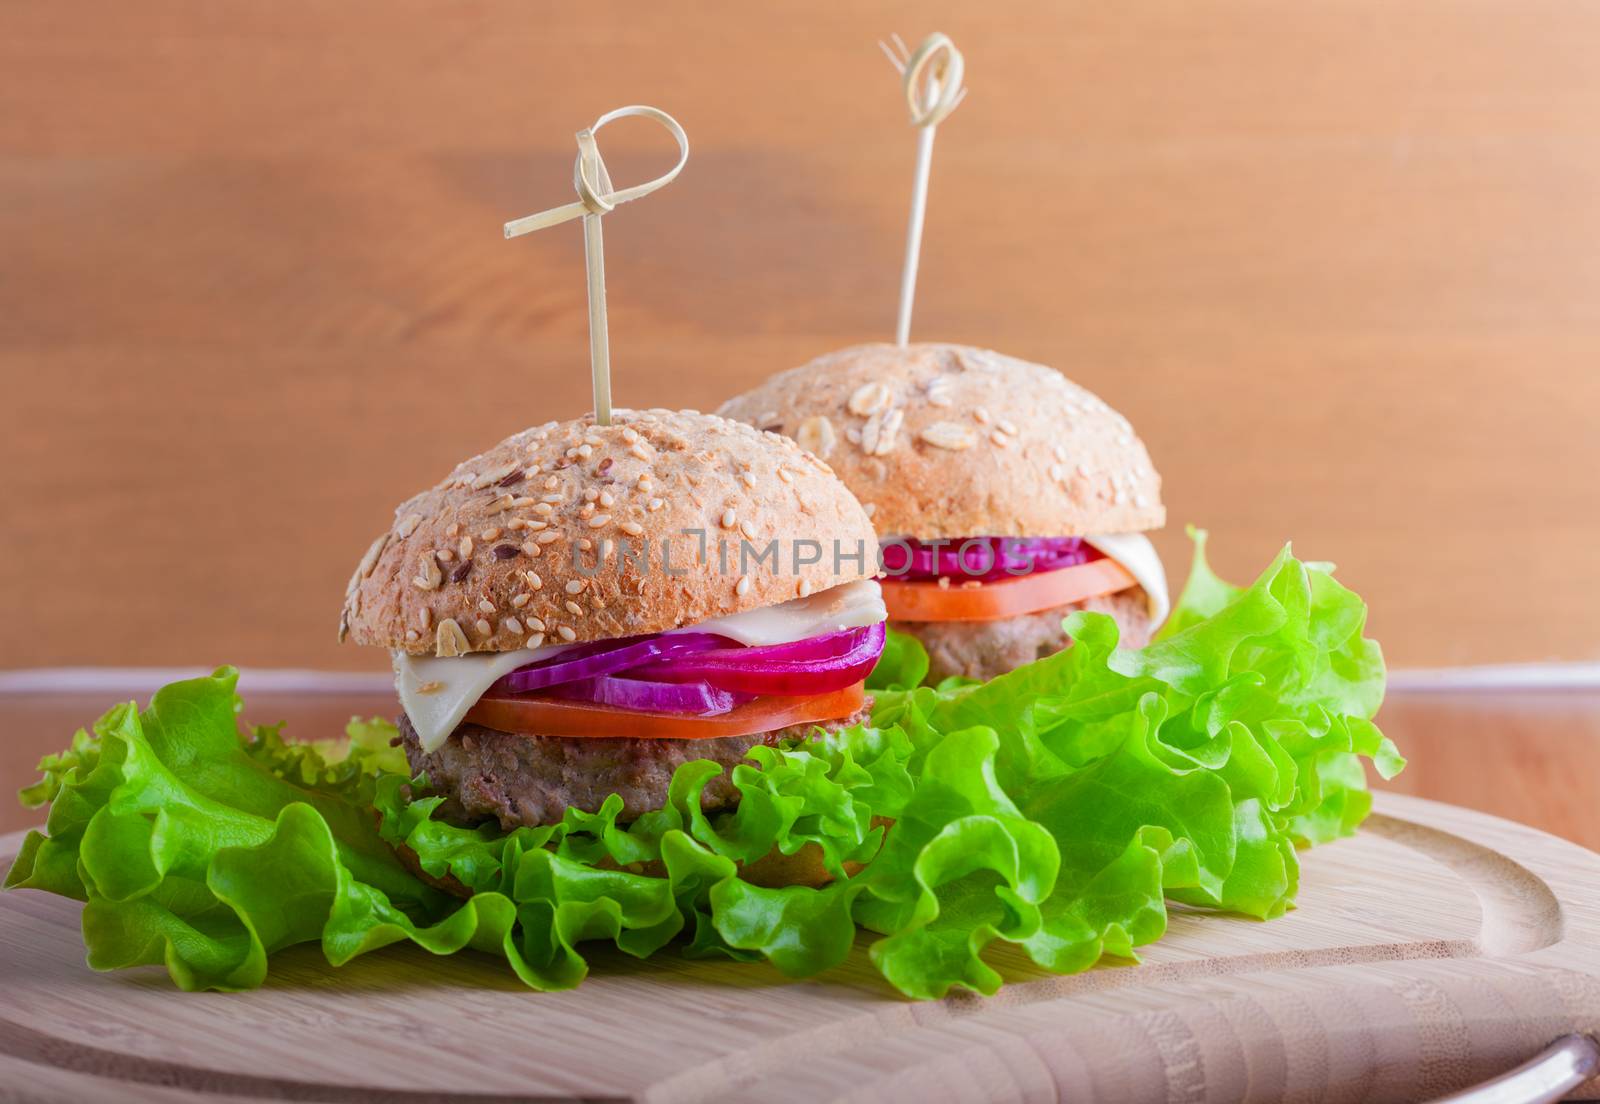 Cheeseburger with tomato, onion and green salad by supercat67